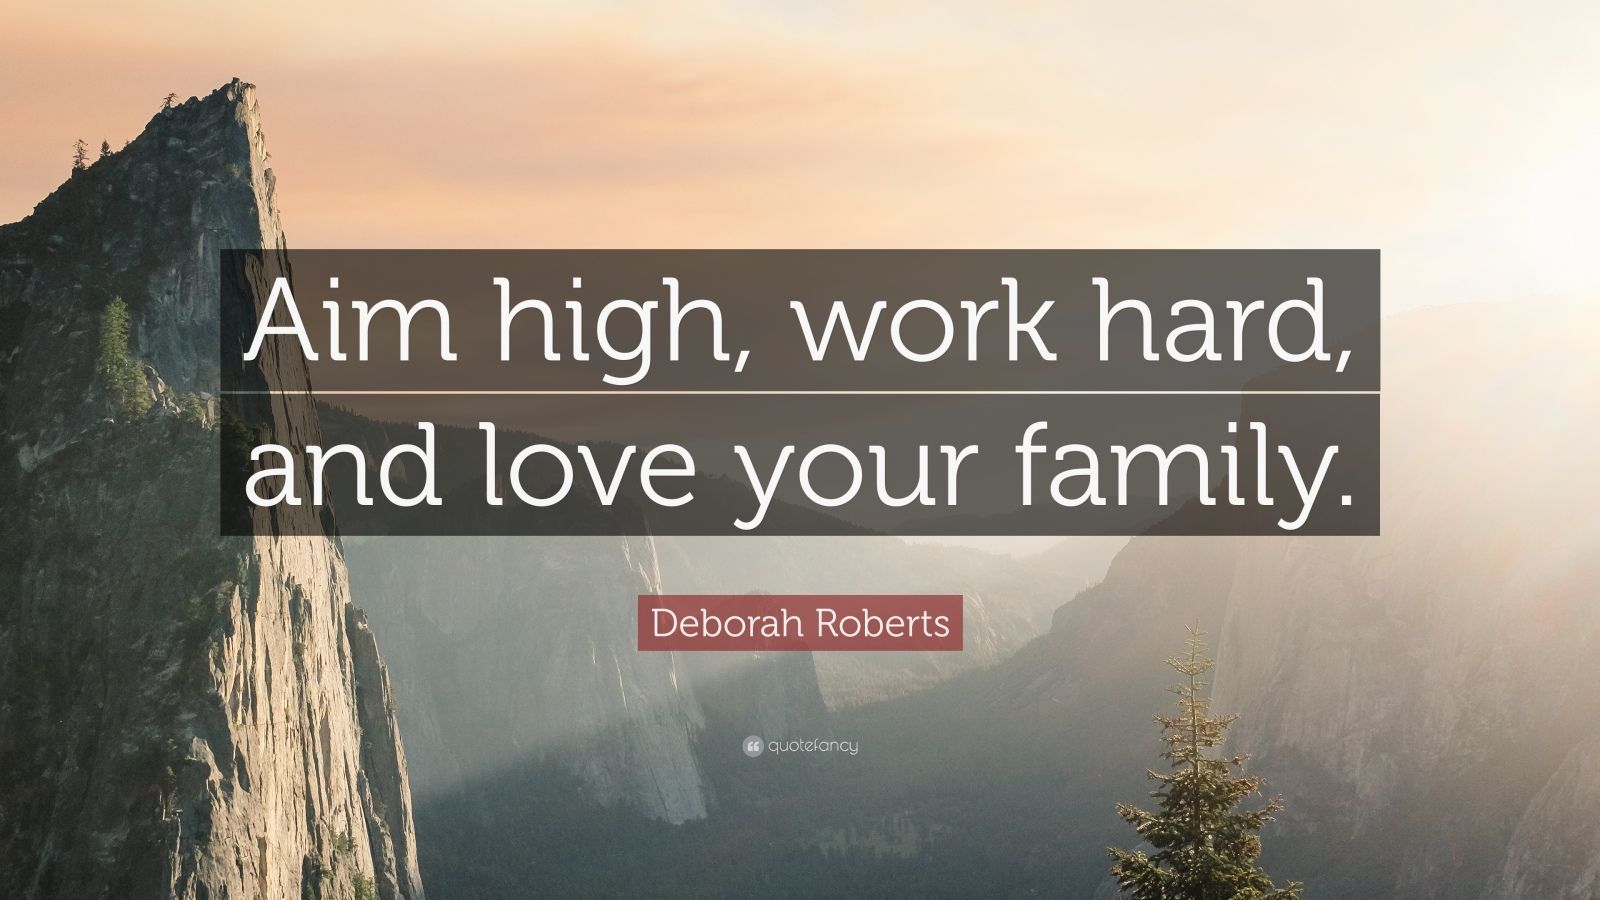 Deborah Roberts Quote: “Aim high, work hard, and love your family.”